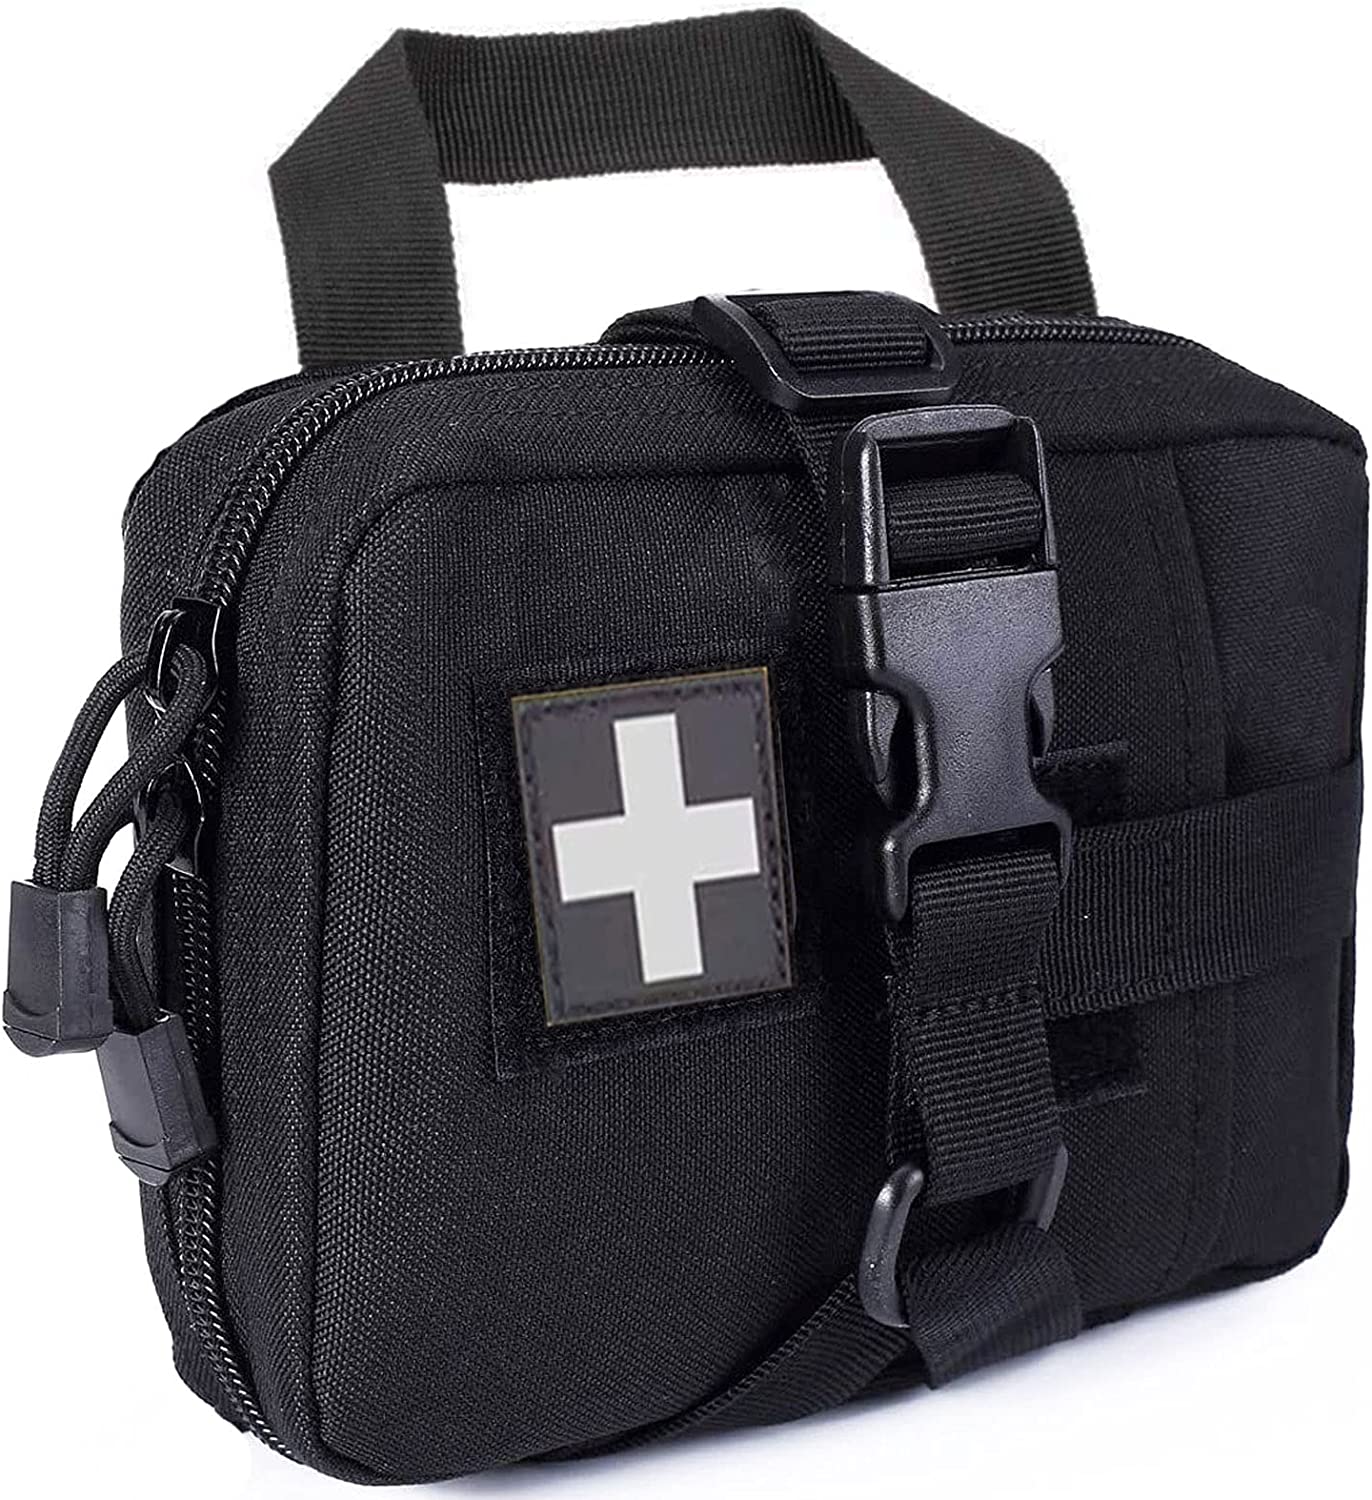 First Aid Kit Compact and Versatile Medical Pouch #MP02